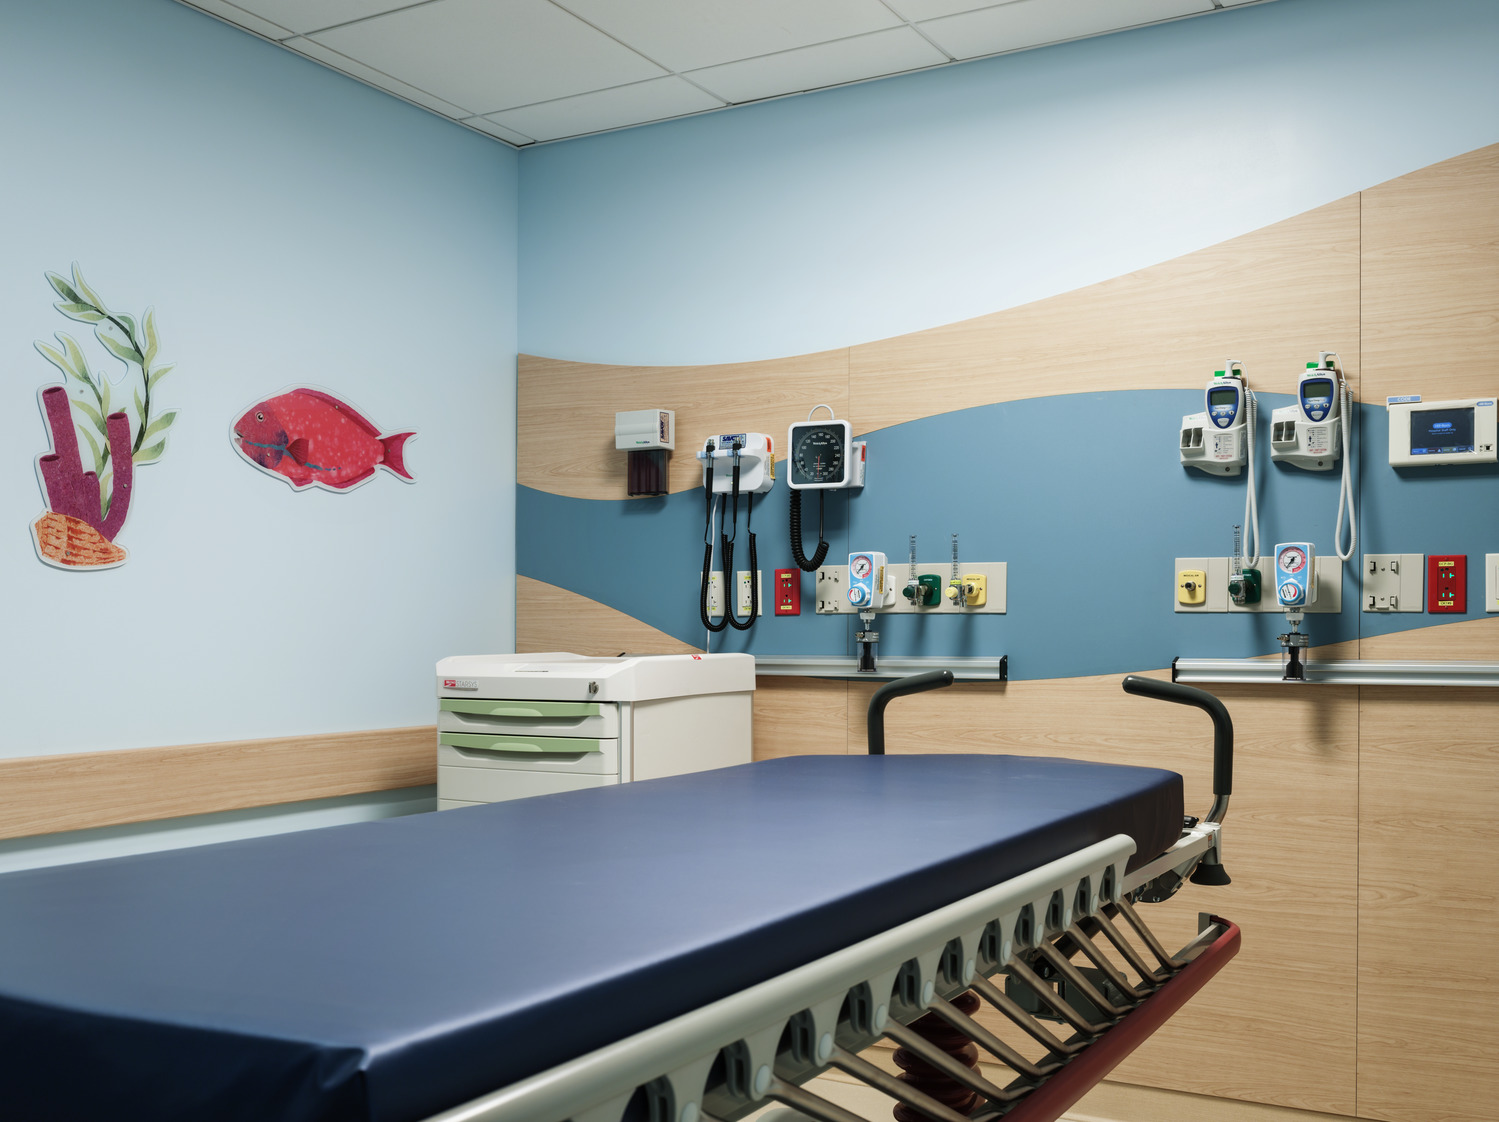 Pediatric exam room with table, storage areas, equipment and under the sea wall graphics